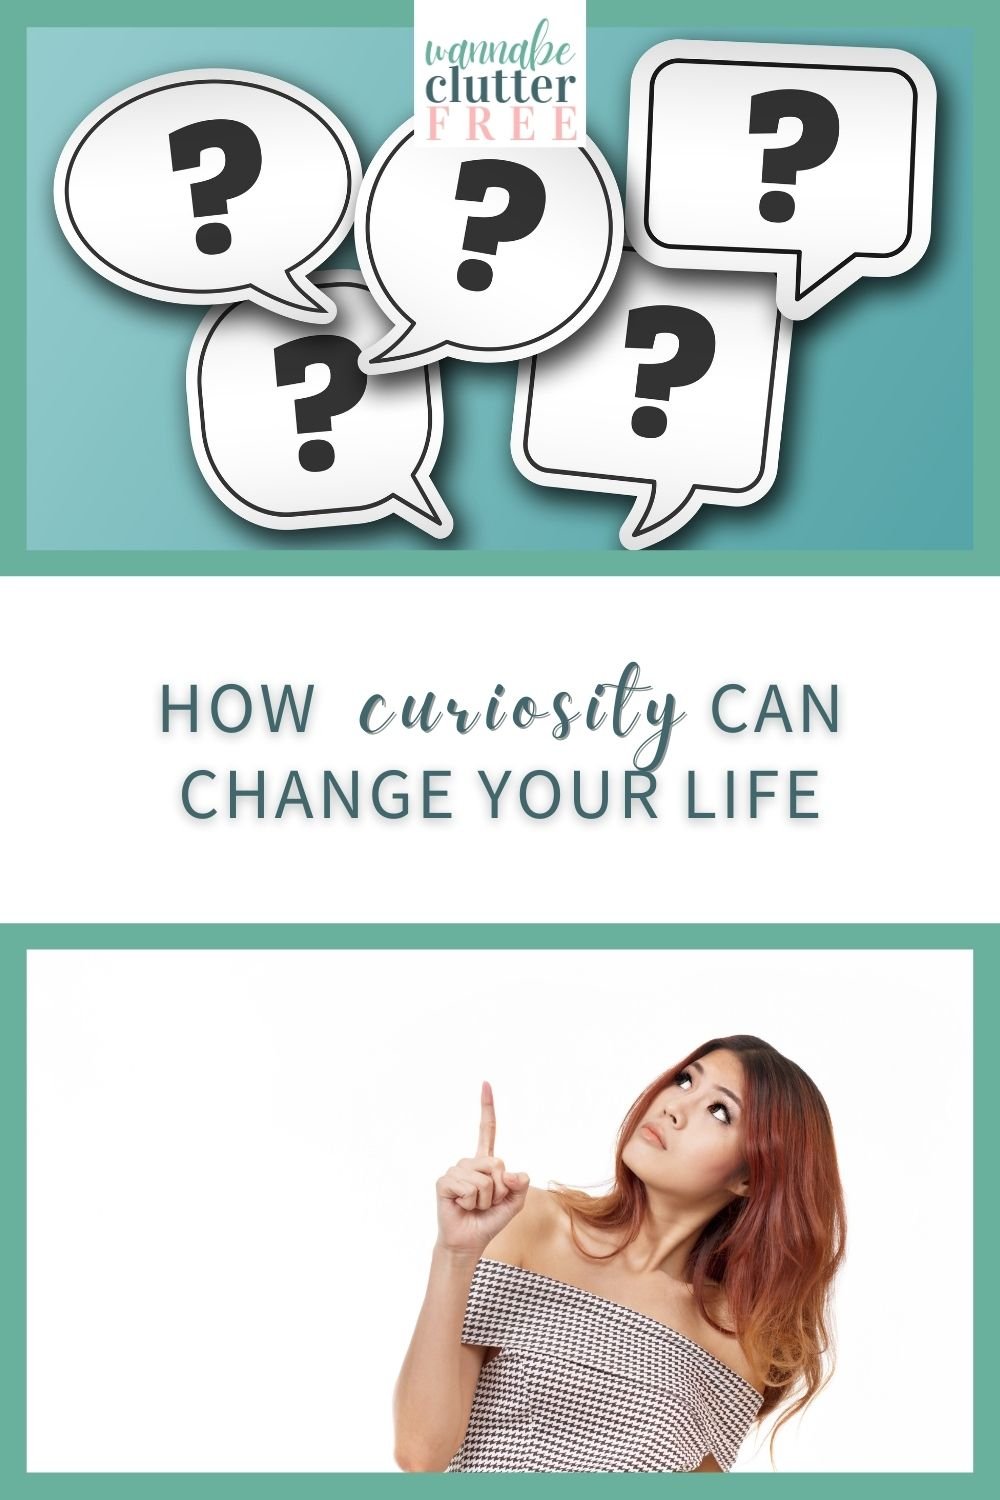 How curiosity can change your life